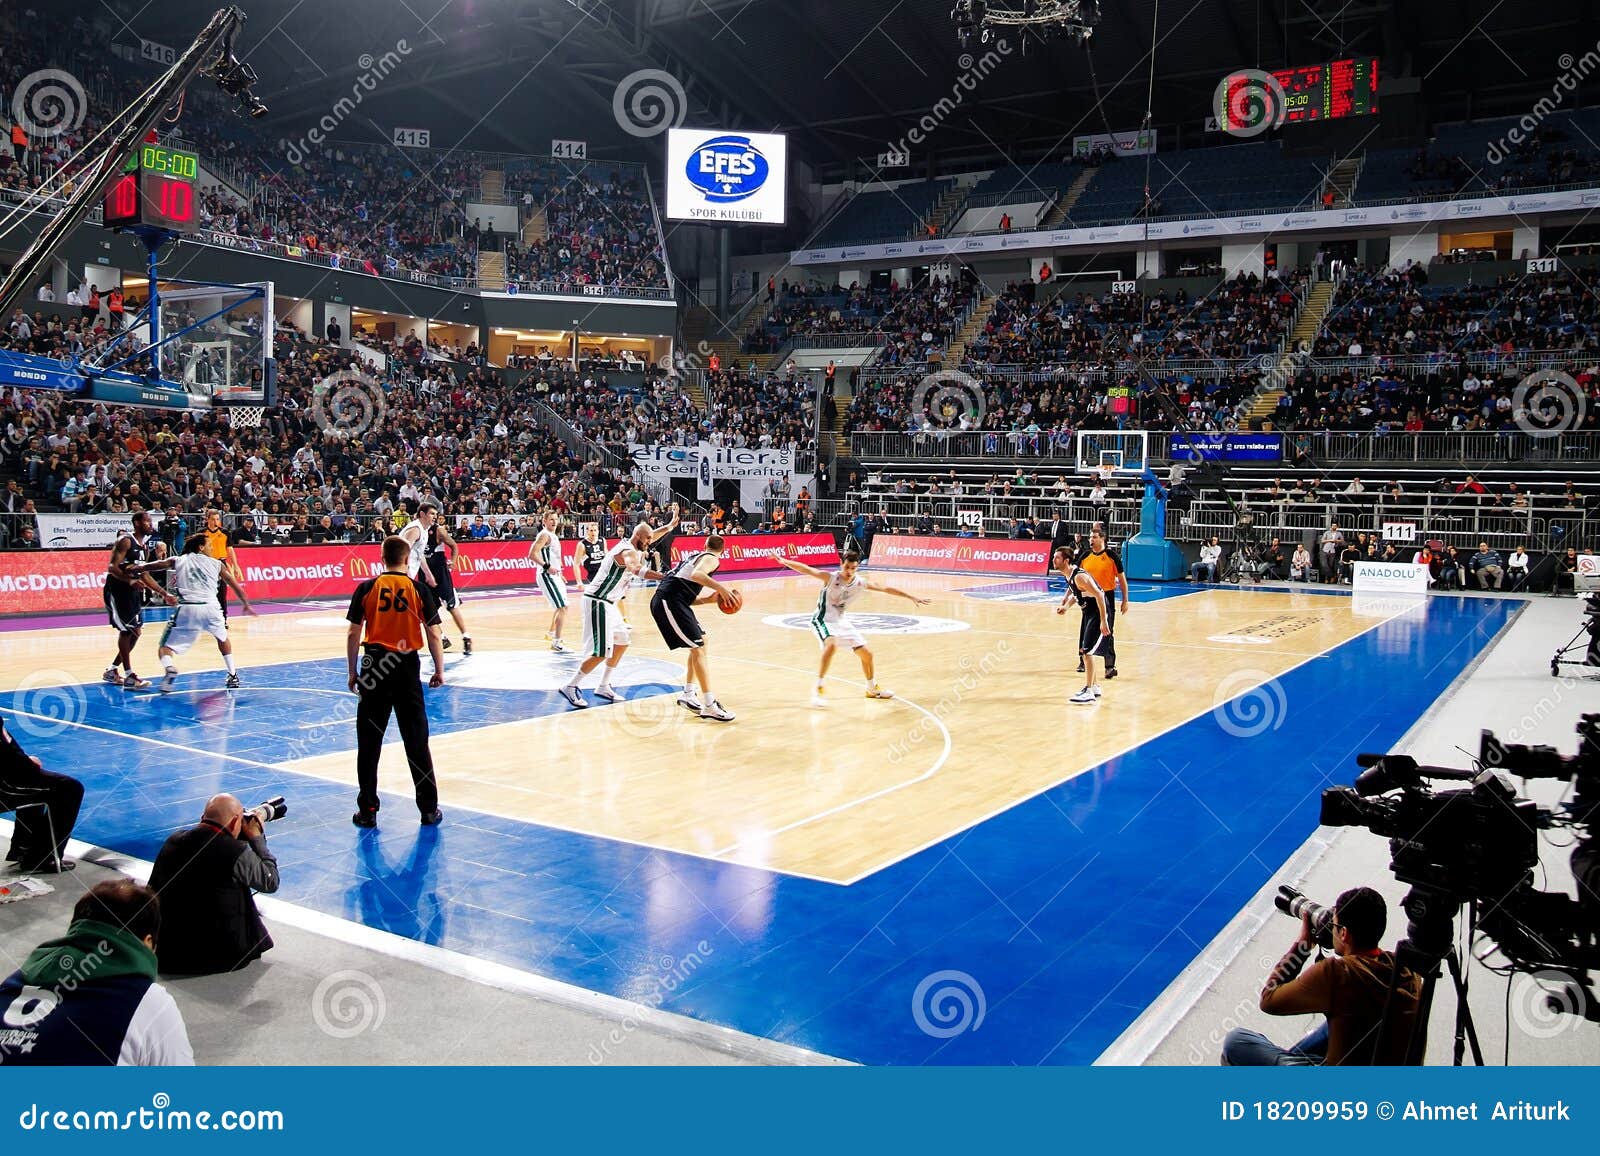 664 People Watch Basketball Game Stock Photos